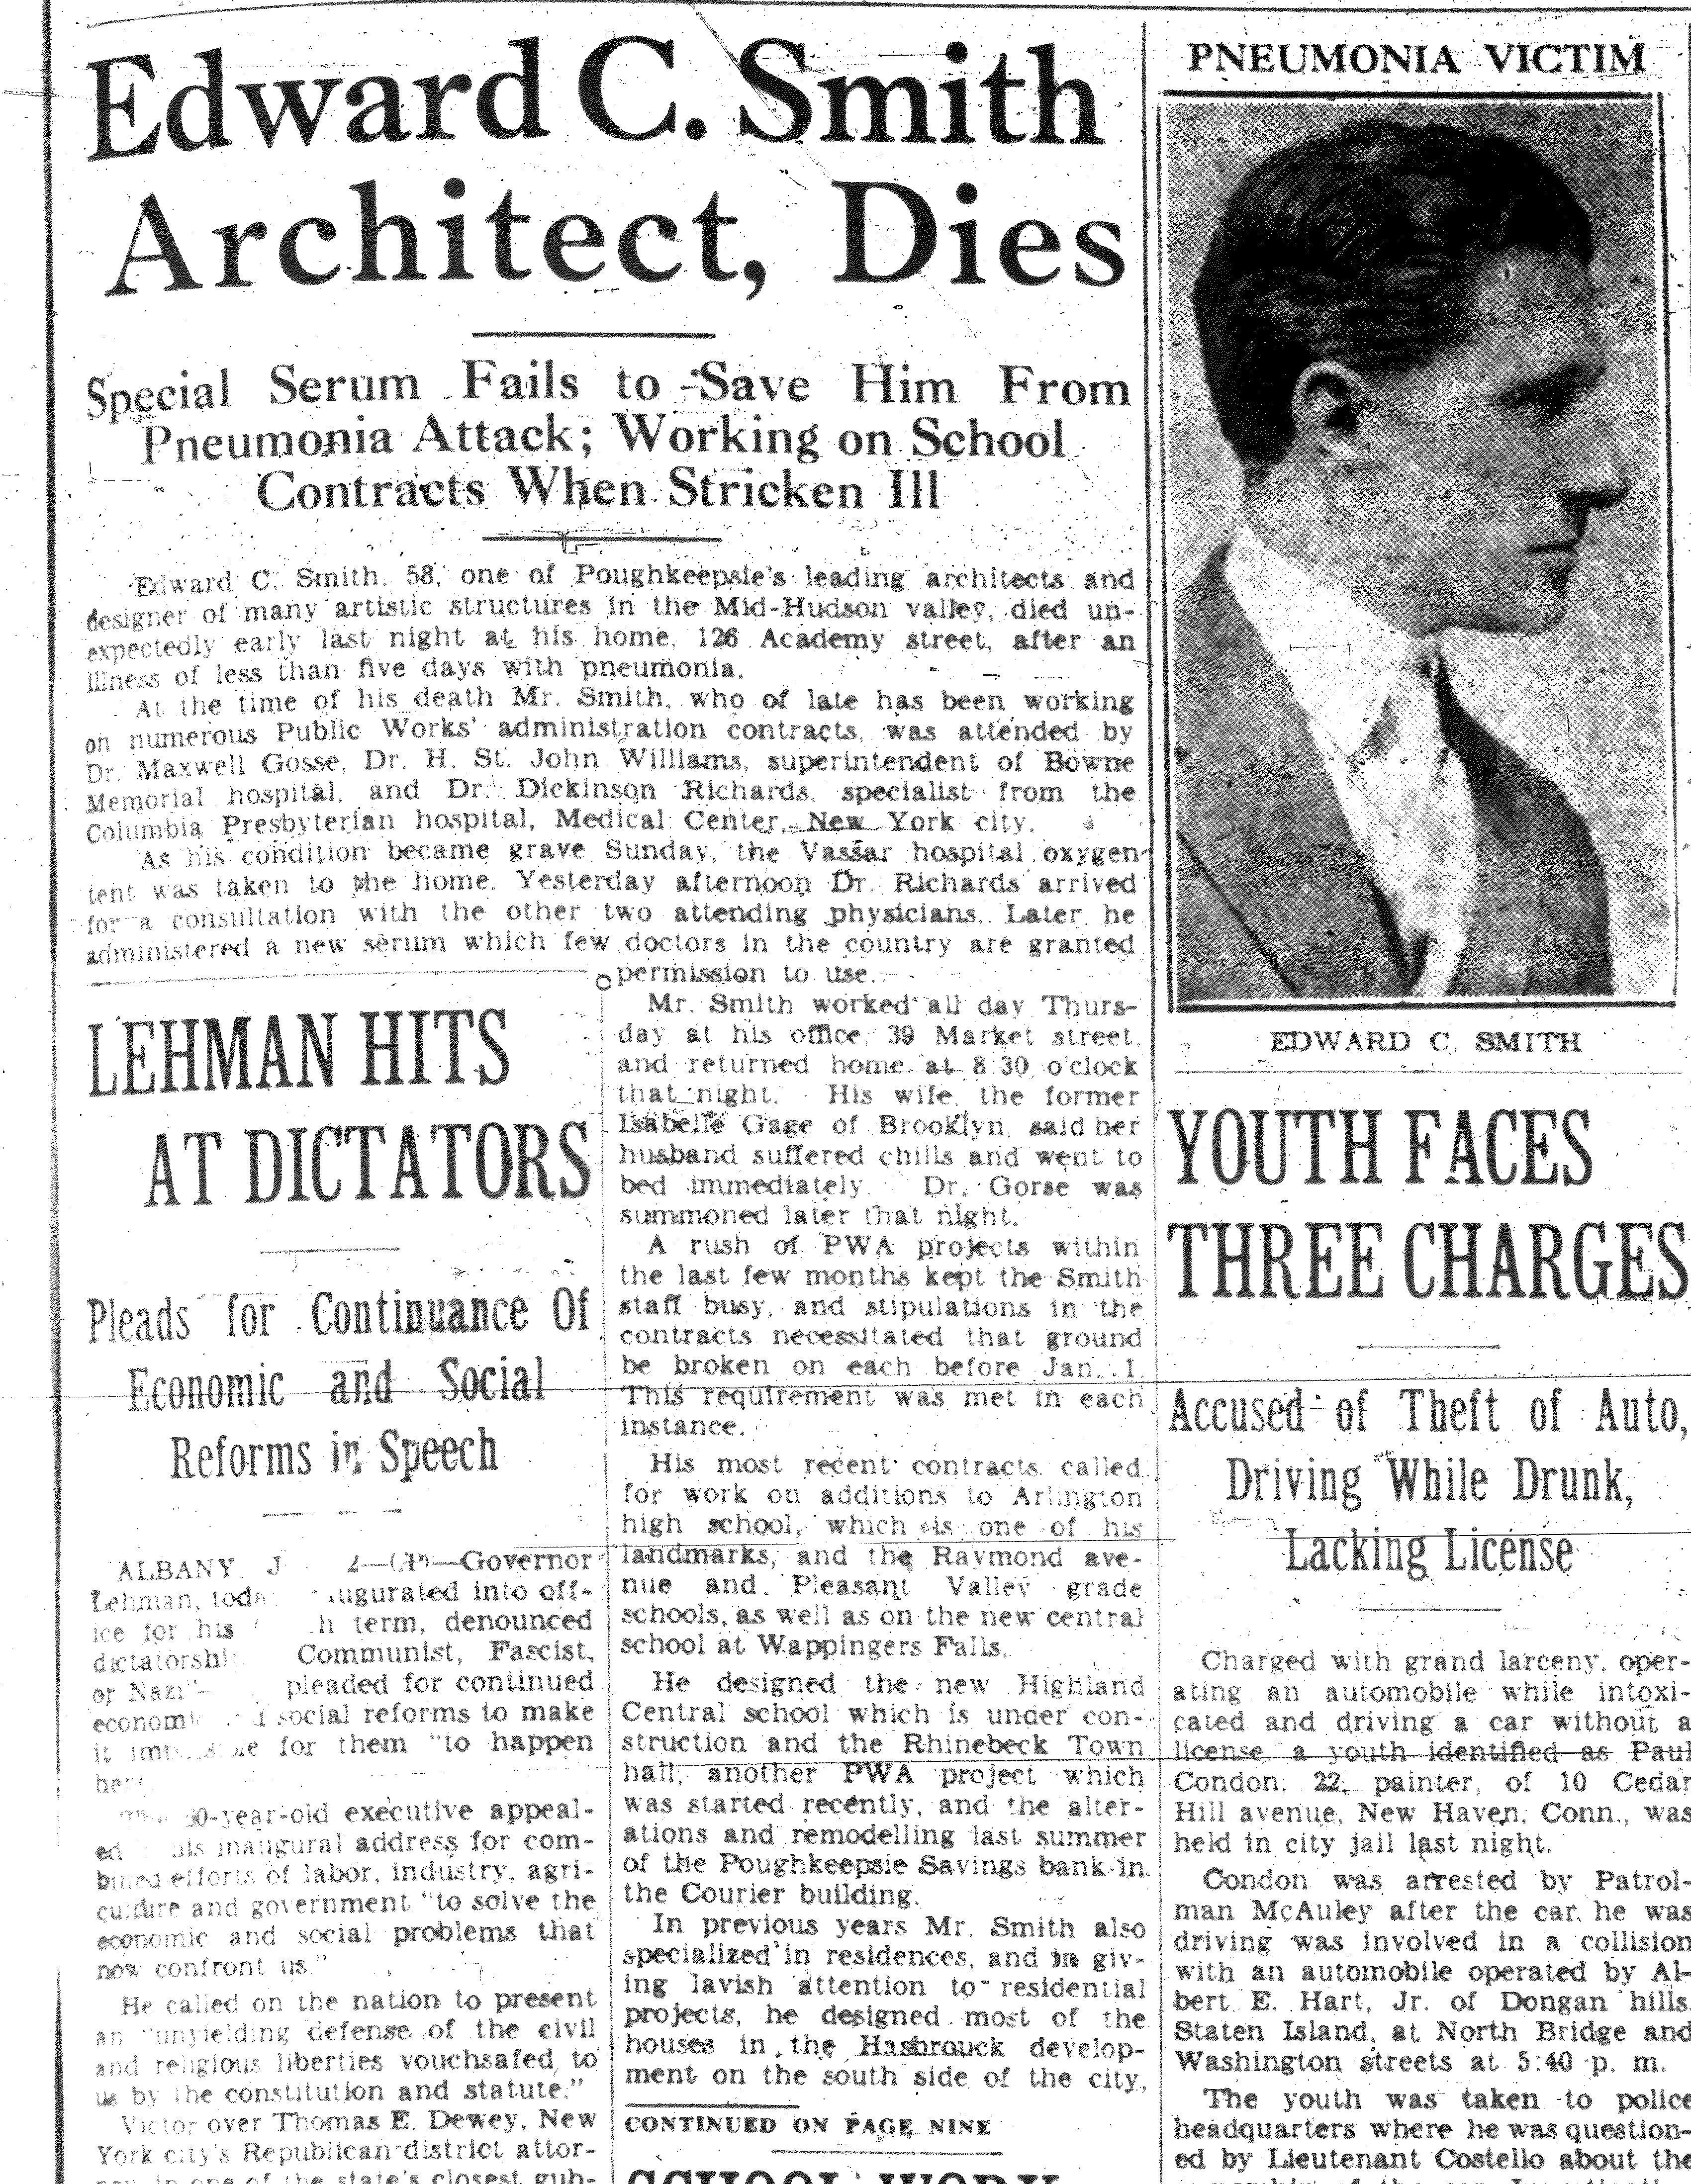 Article about death of Edward C Smith